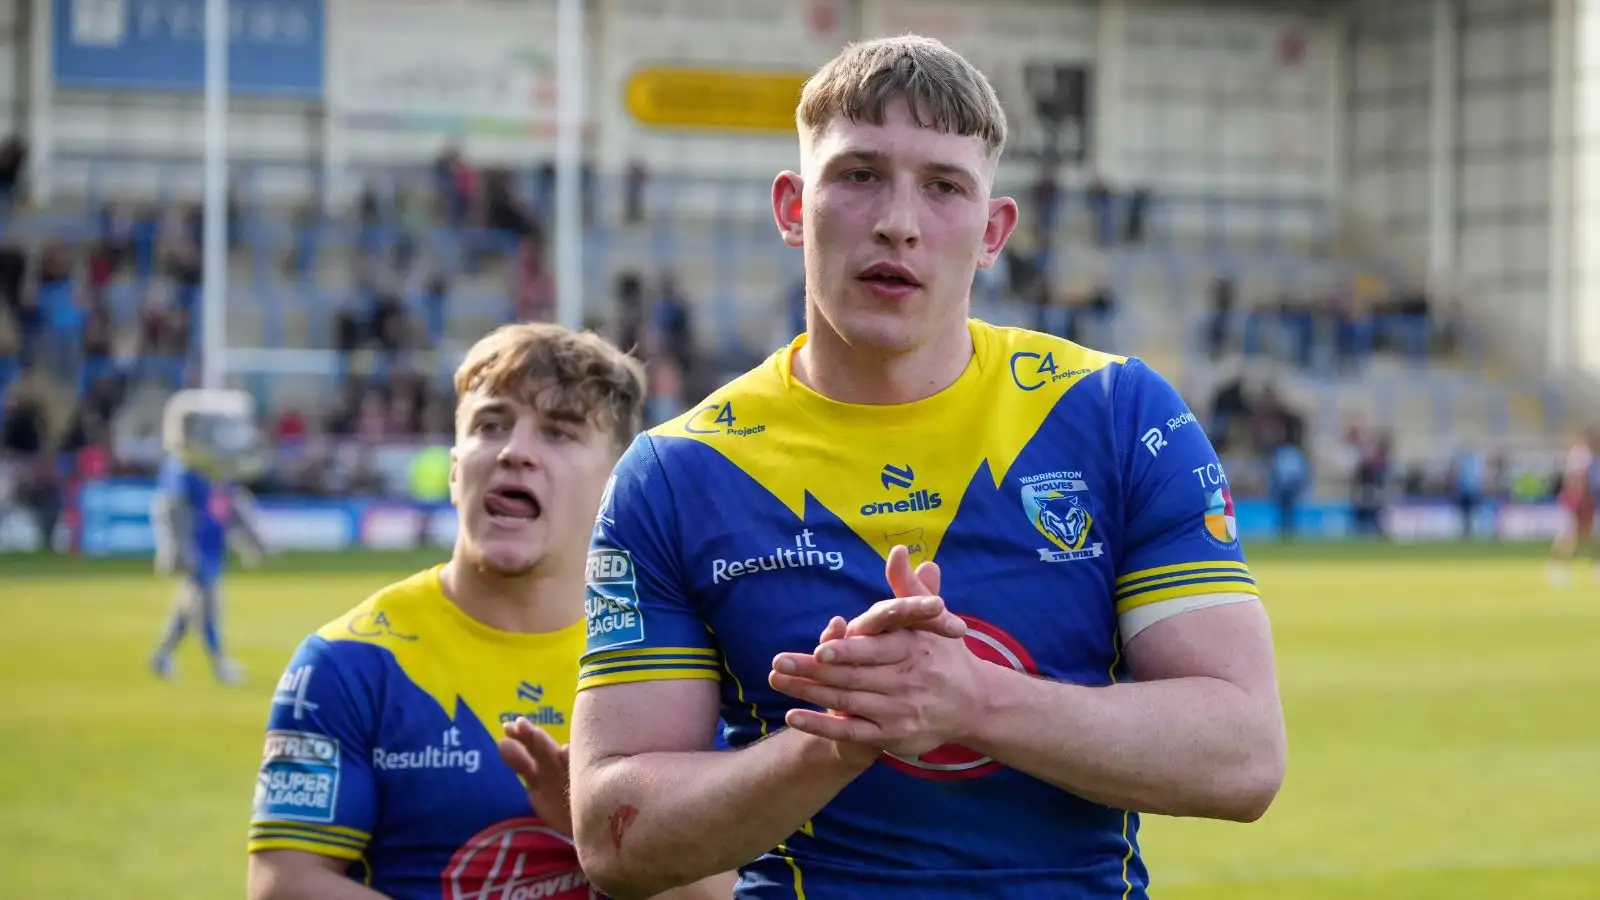 Warrington Wolves young gun aiming to add to solitary England cap: ‘It’s the pinnacle’